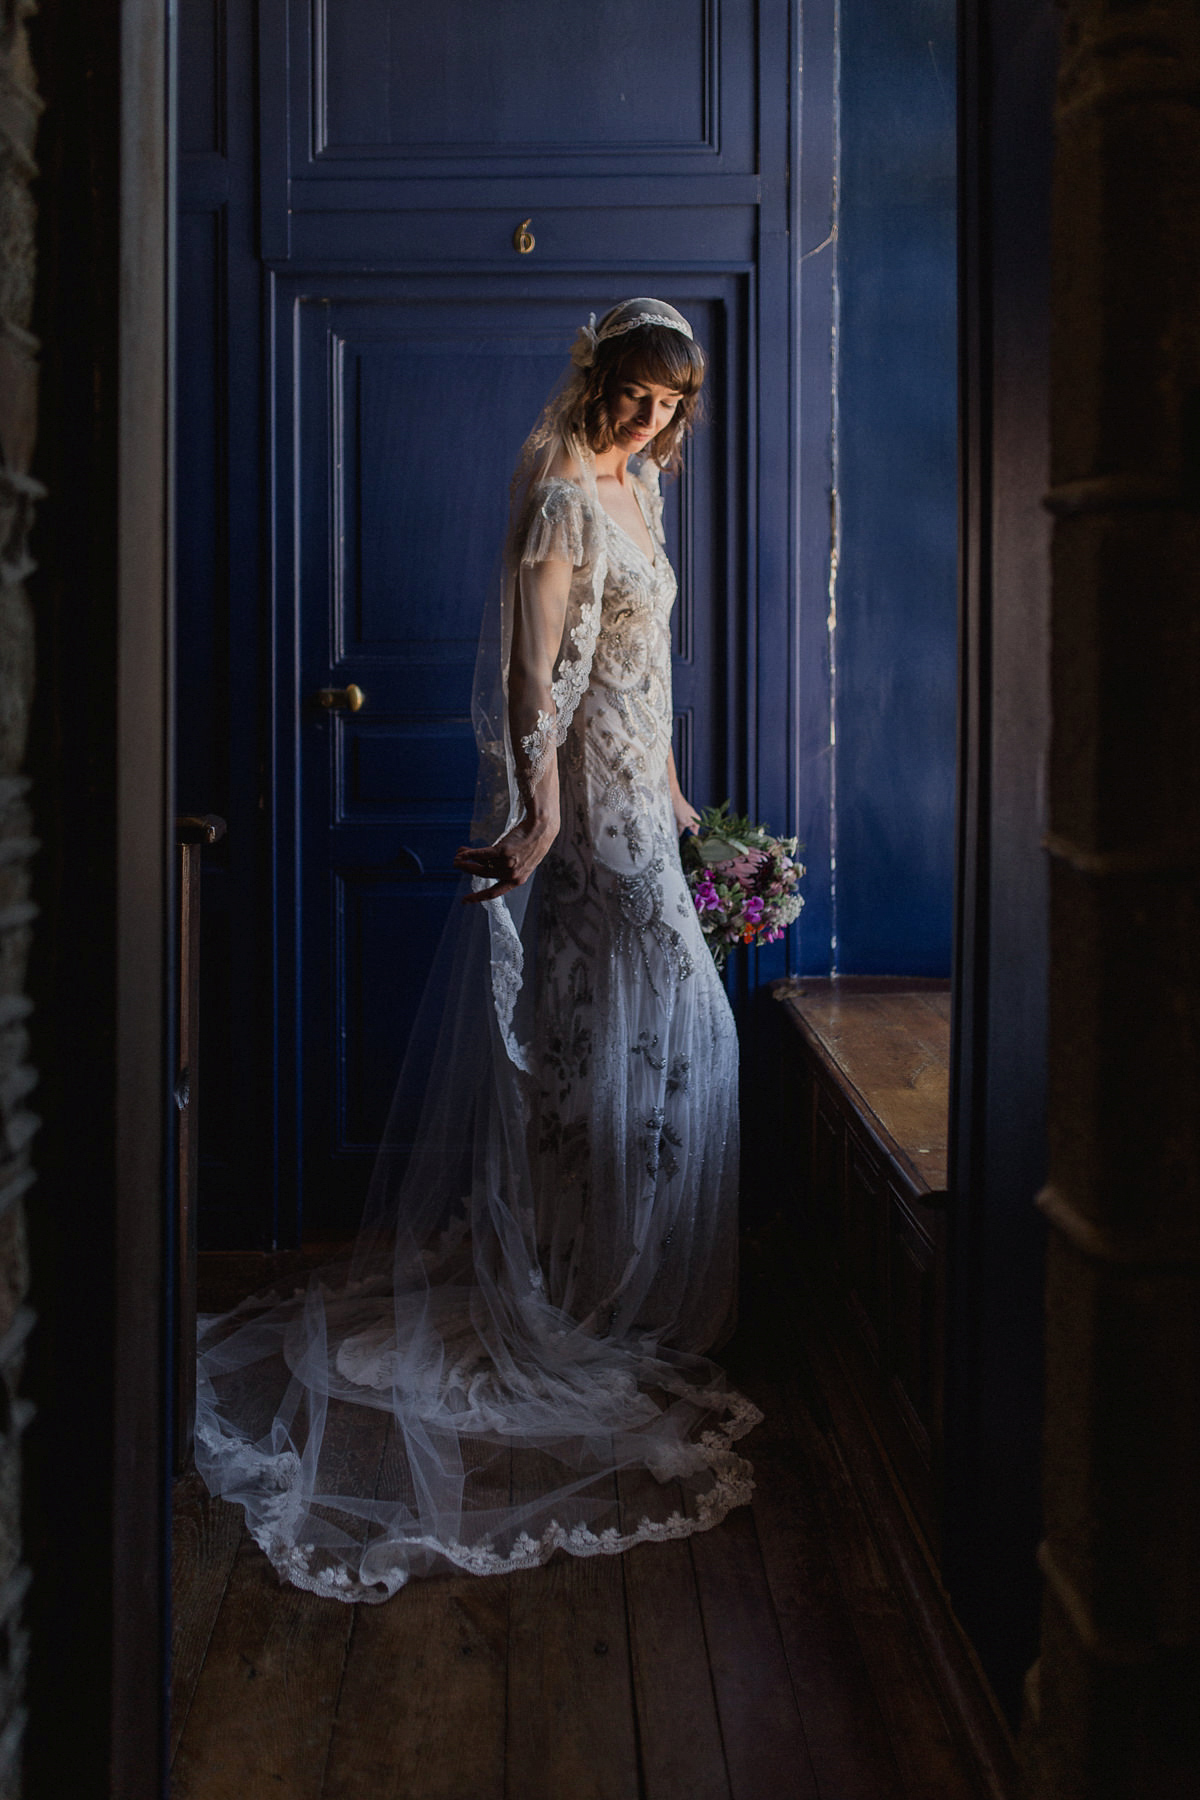 Bride Imogen wore the 'Jayne' gown by Eliza Jane Howell, and a Juliet cap veil, for her Celtic handfasting wedding at a French cheateau. Photography by Lifestories Wedding Photography.